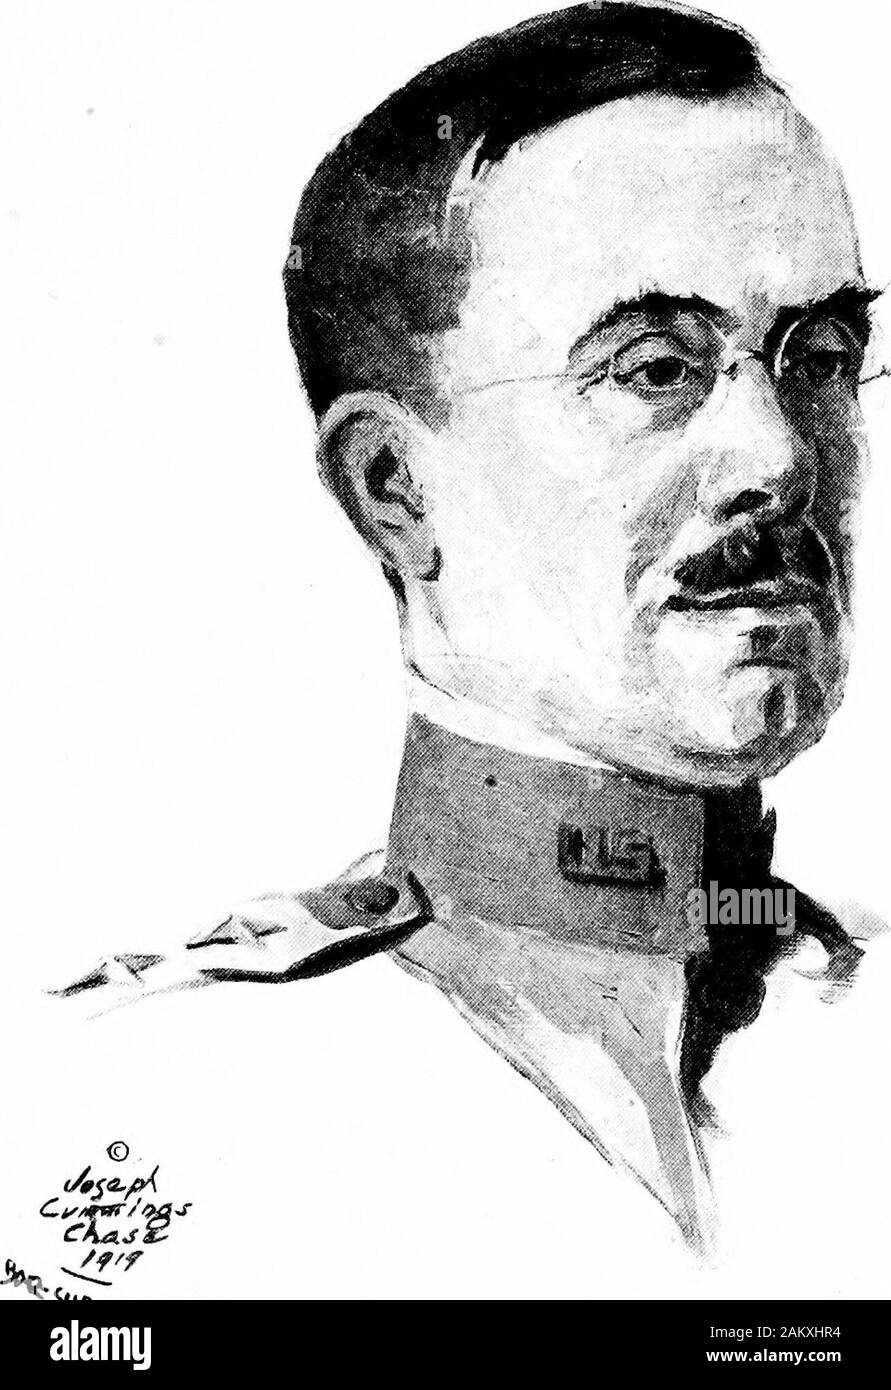 Soldiers all; portraits and sketches of the men of the AEF. . [289]. •k^fi. BRIGADIER GENERAL BENJAMIN D. FOULOIS Arrived in France, November 12, 1917.Assignments: Chief of Air Service, November 17, 1917—May, 1918;Chief of Air Service, First Army, May, 1918— July, 1918;Assistant Chief of Air Service, A. E. F., July, 1918.Born: Connecticut, December 9, 1879. Cited for especially meritorious services by the Commander-in-Chief, A. E. F. [293 ] Stock Photo